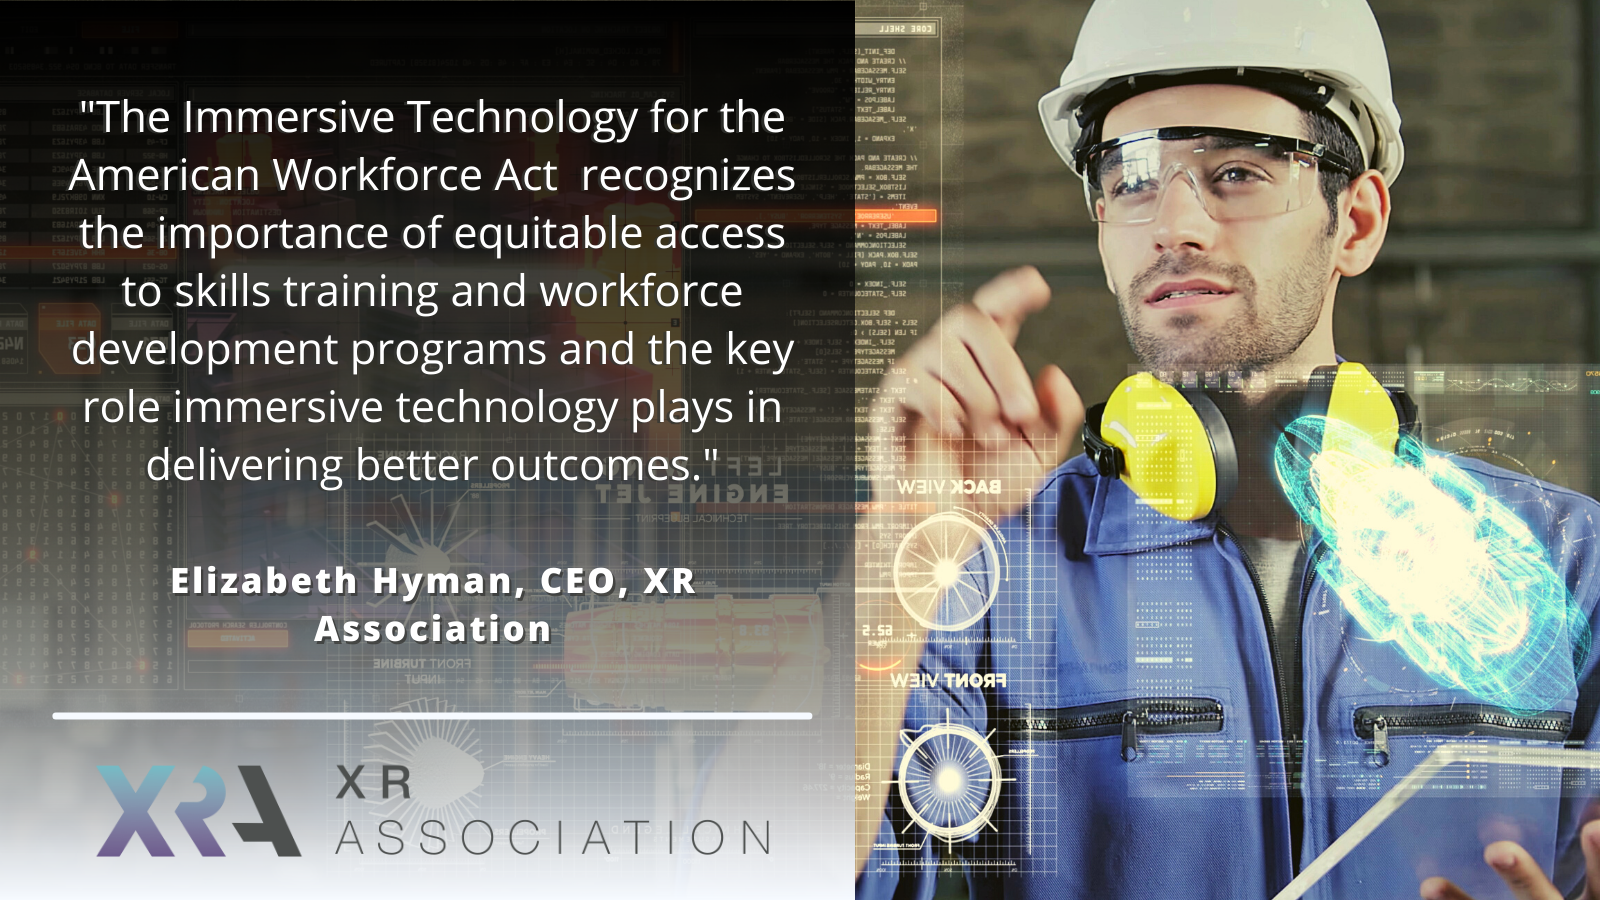 XR ASSOCIATION APPLAUDS THE REINTRODUCTION OF THE “IMMERSIVE TECHNOLOGY FOR THE AMERICAN WORKFORCE ACT”